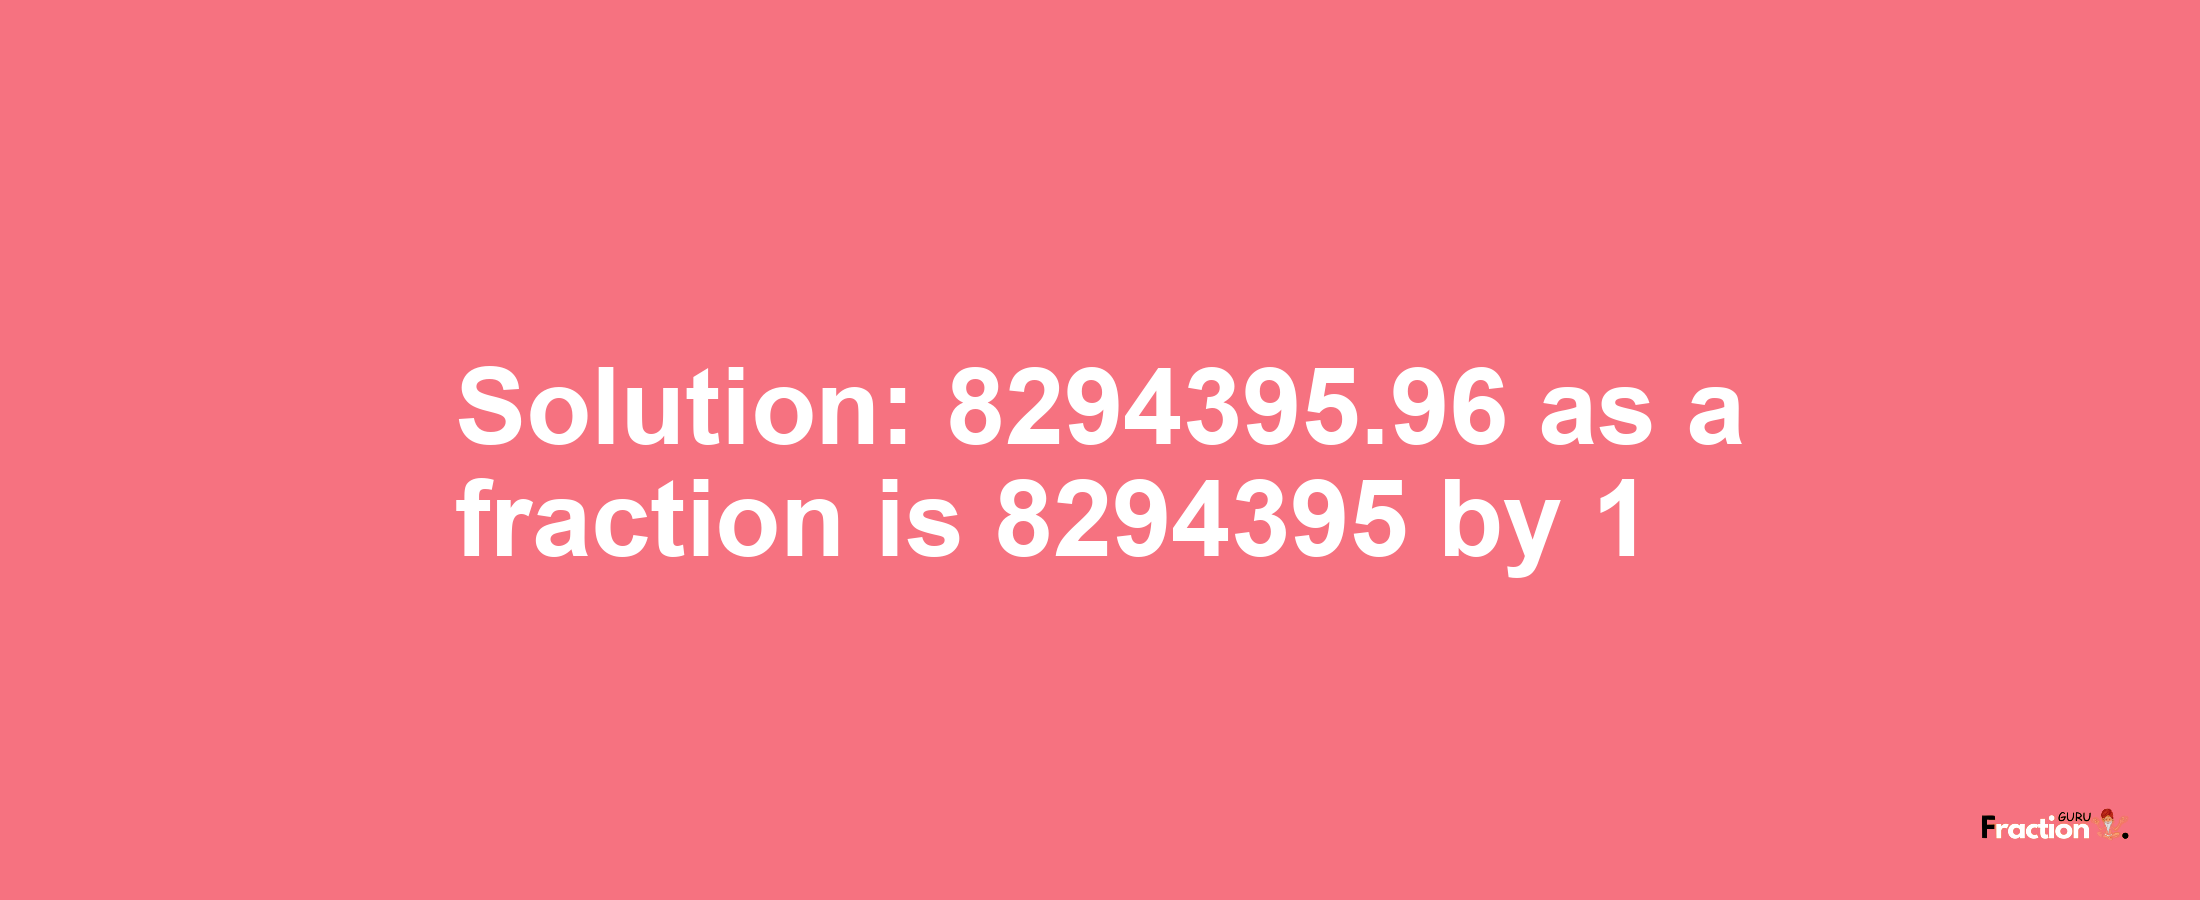 Solution:8294395.96 as a fraction is 8294395/1